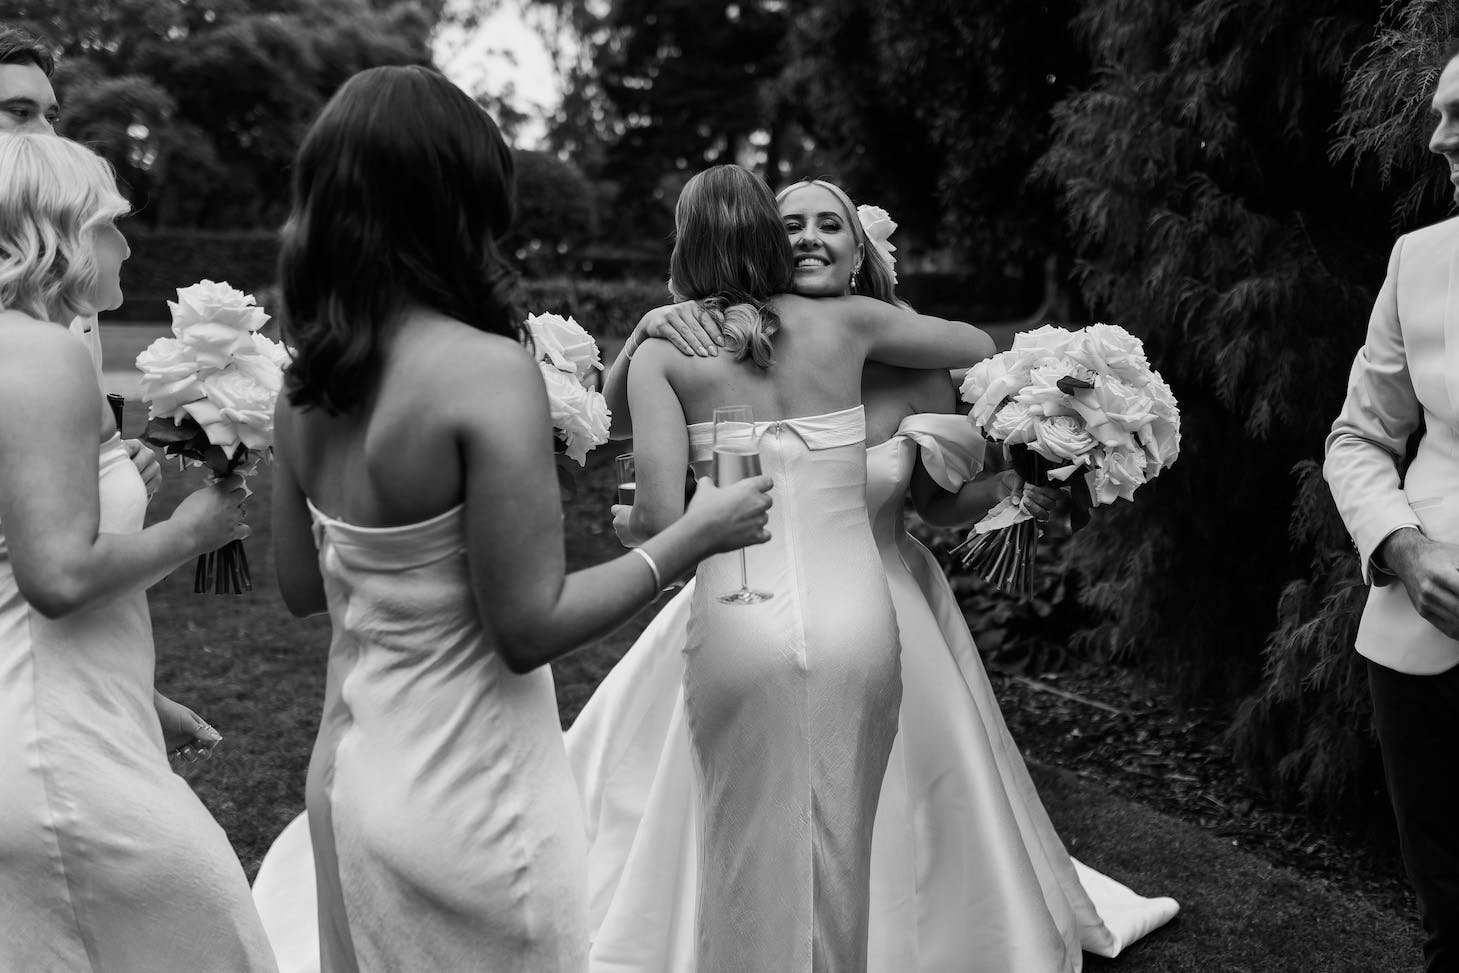 A bride in a white wedding dress warmly hugs a bridesmaid in a strapless dress while another bridesmaid holds a bouquet. One bridesmaid has a glass of champagne, and a man in a suit stands nearby. They are outdoors, with trees and greenery in the background.